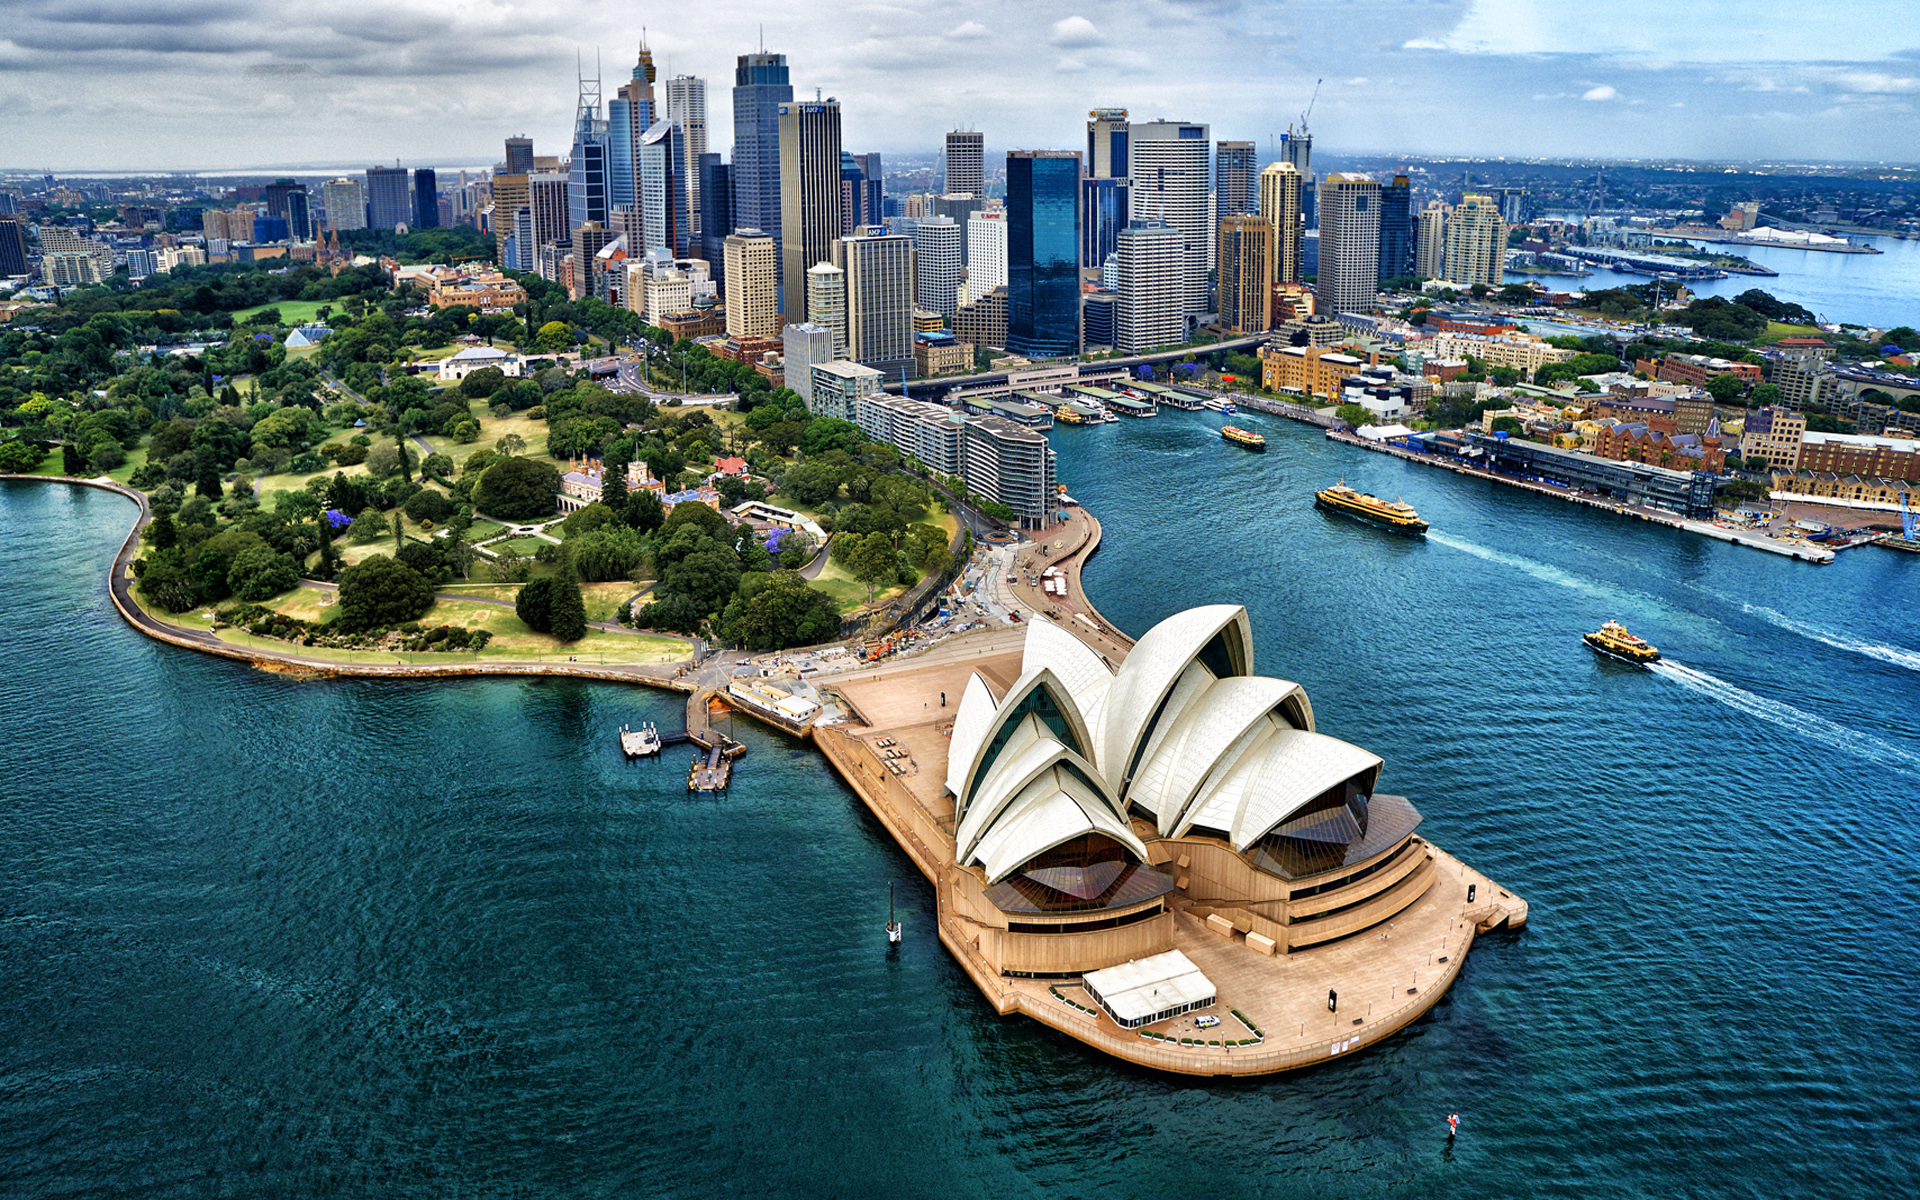 Download "Sydney" wallpapers for mobile